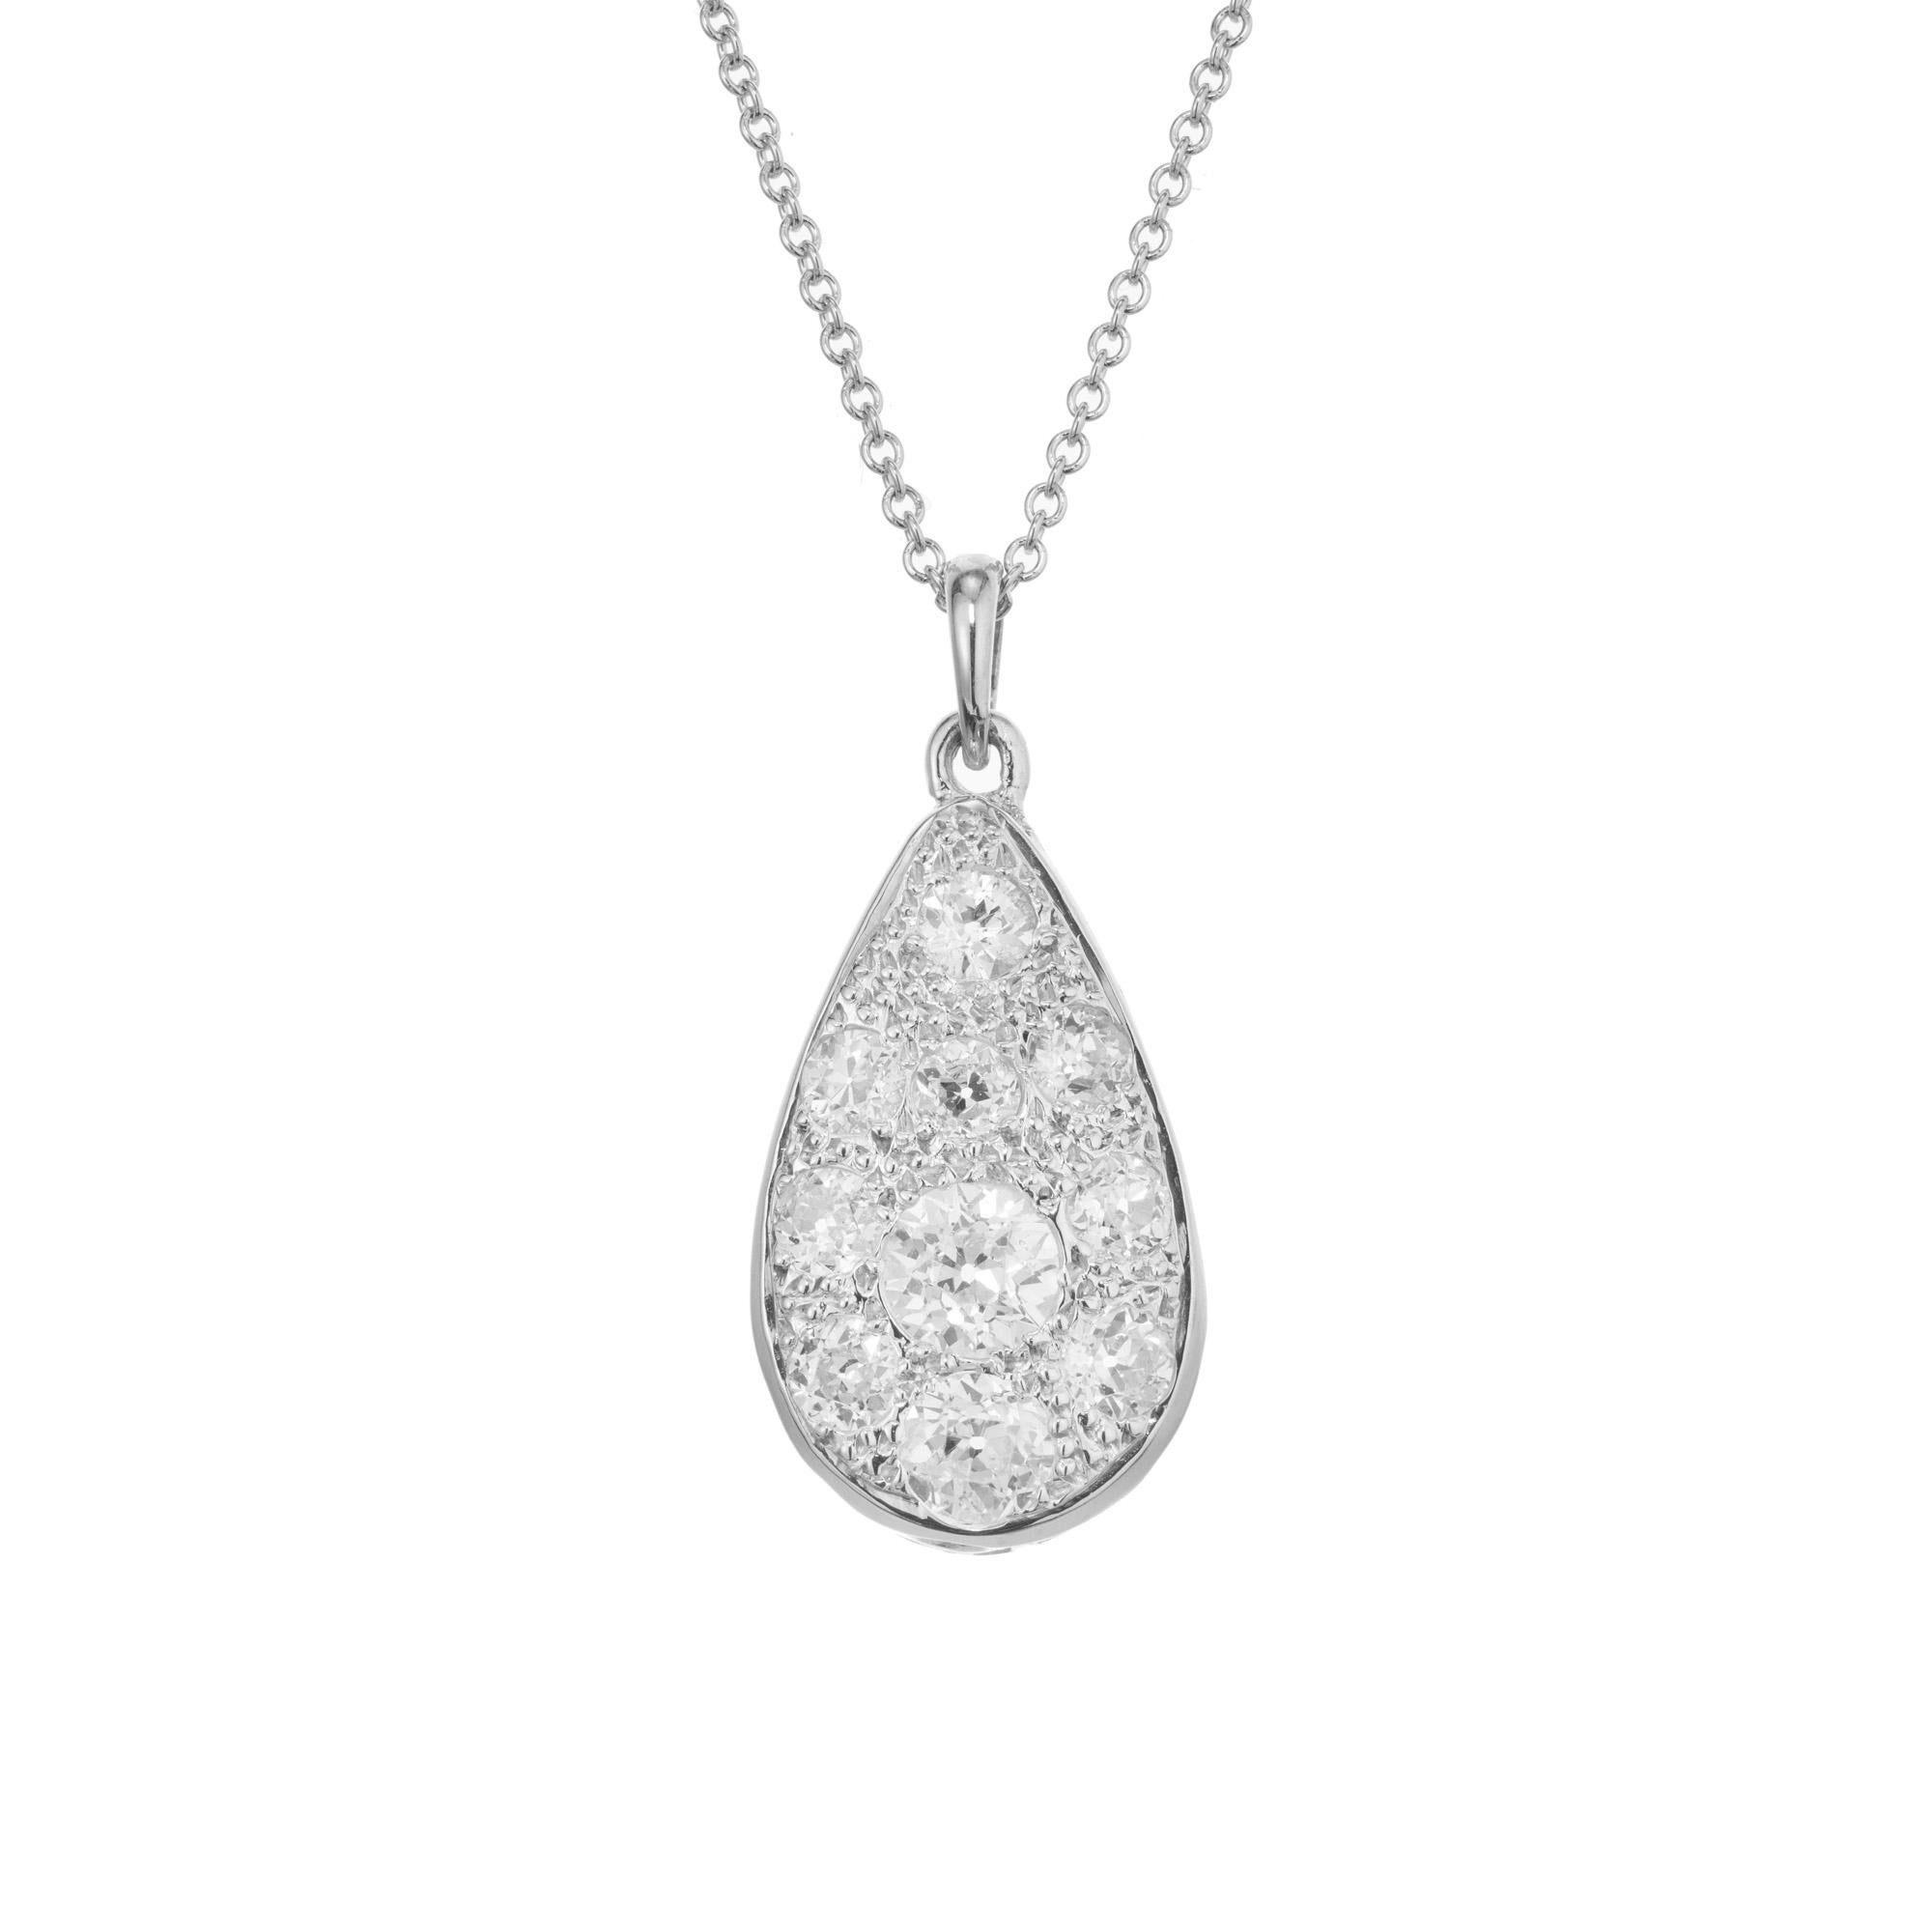 1970's Diamond pendant necklace. Ten Old European cut diamonds totaling 2.10cts set in a classic 14k white gold tear drop shaped pendant. Completed with an 18 inch 14k white gold chain. The diamonds are circa 1900-1920 that were cluster set into a